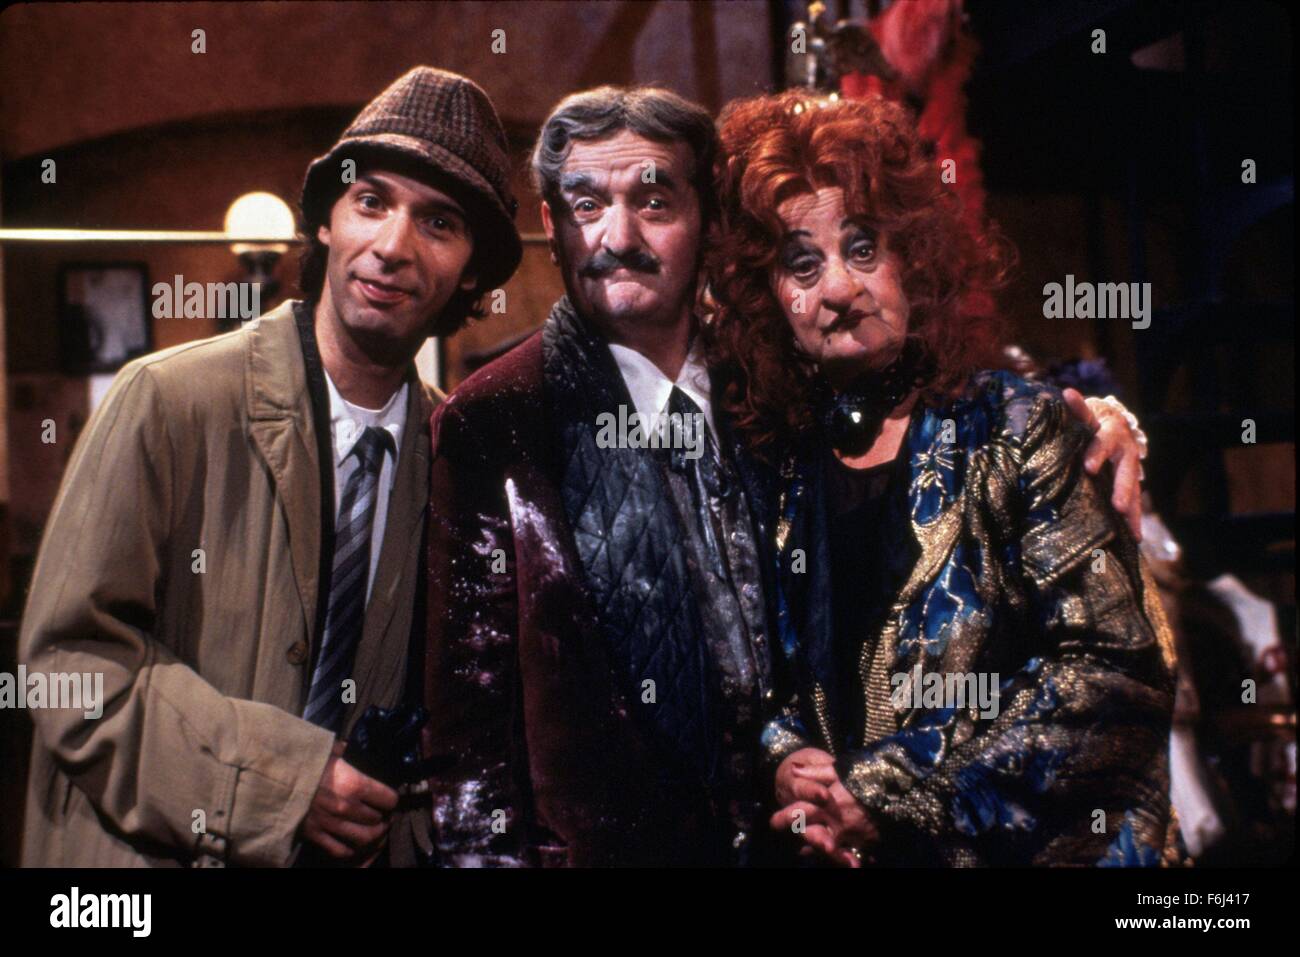 1993, Film Title: SON OF THE PINK PANTHER, Director: BLAKE EDWARDS, Studio: MGM/UA, Pictured: ROBERTO BENIGNI, BLAKE EDWARDS, PINK PANTHER FILMS, LIZ SMITH. (Credit Image: SNAP) Stock Photo